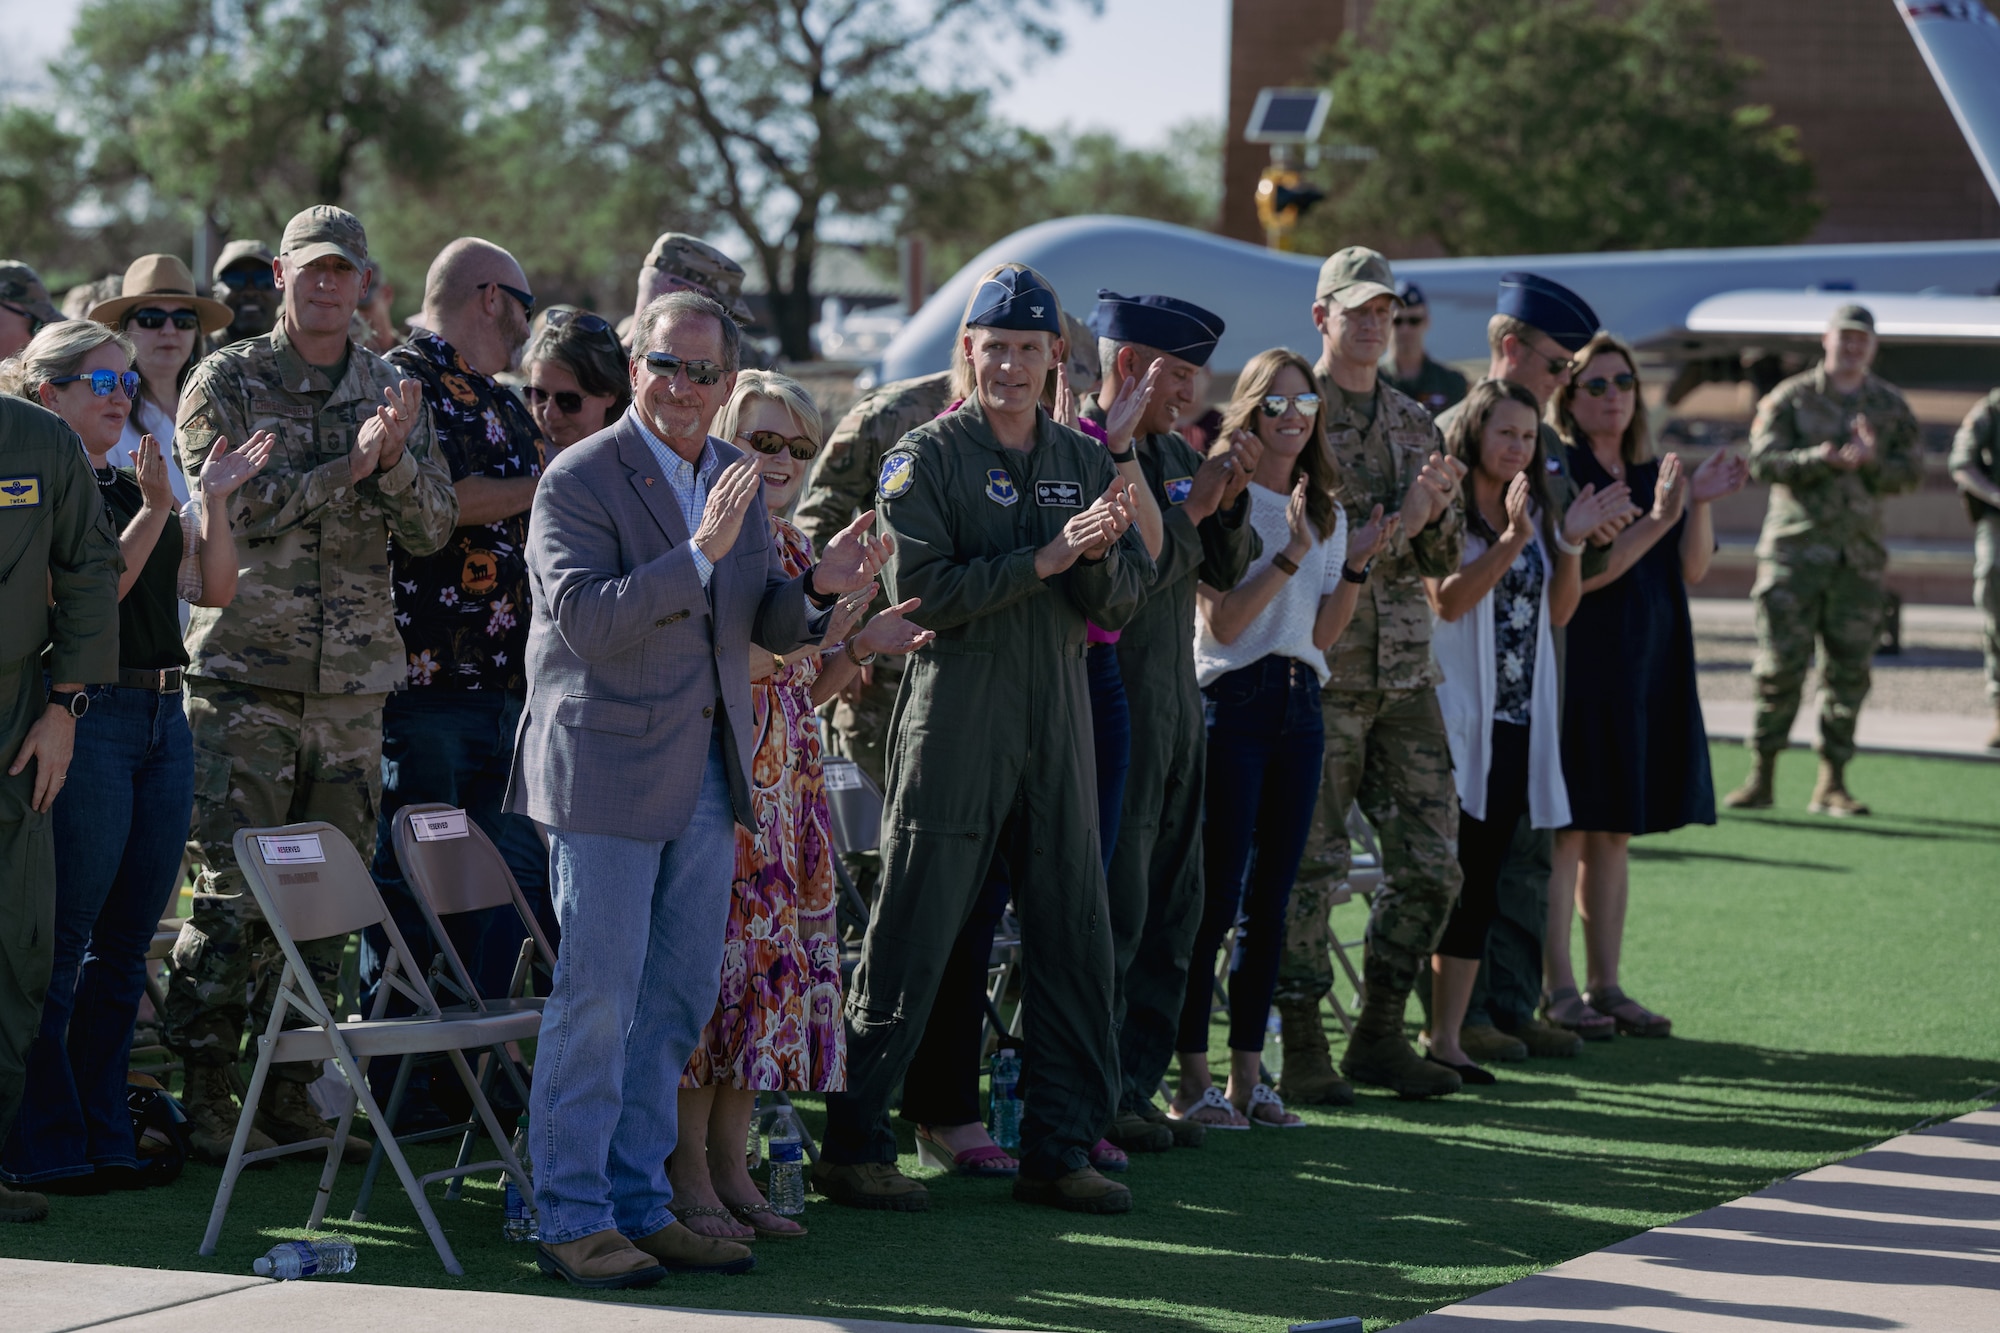 Community members and personnel from the 49th Wing gather at a street renaming ceremony at Holloman Air Force Base, New Mexico, Sept. 22, 2023. A street here was renamed to honor the 21st Chief of Staff of the U.S. Air Force and previous Holloman commander, U.S. Air Force Gen. David L. Goldfein. (U.S. Air Force photo by Senior Airman Antonio Salfran)